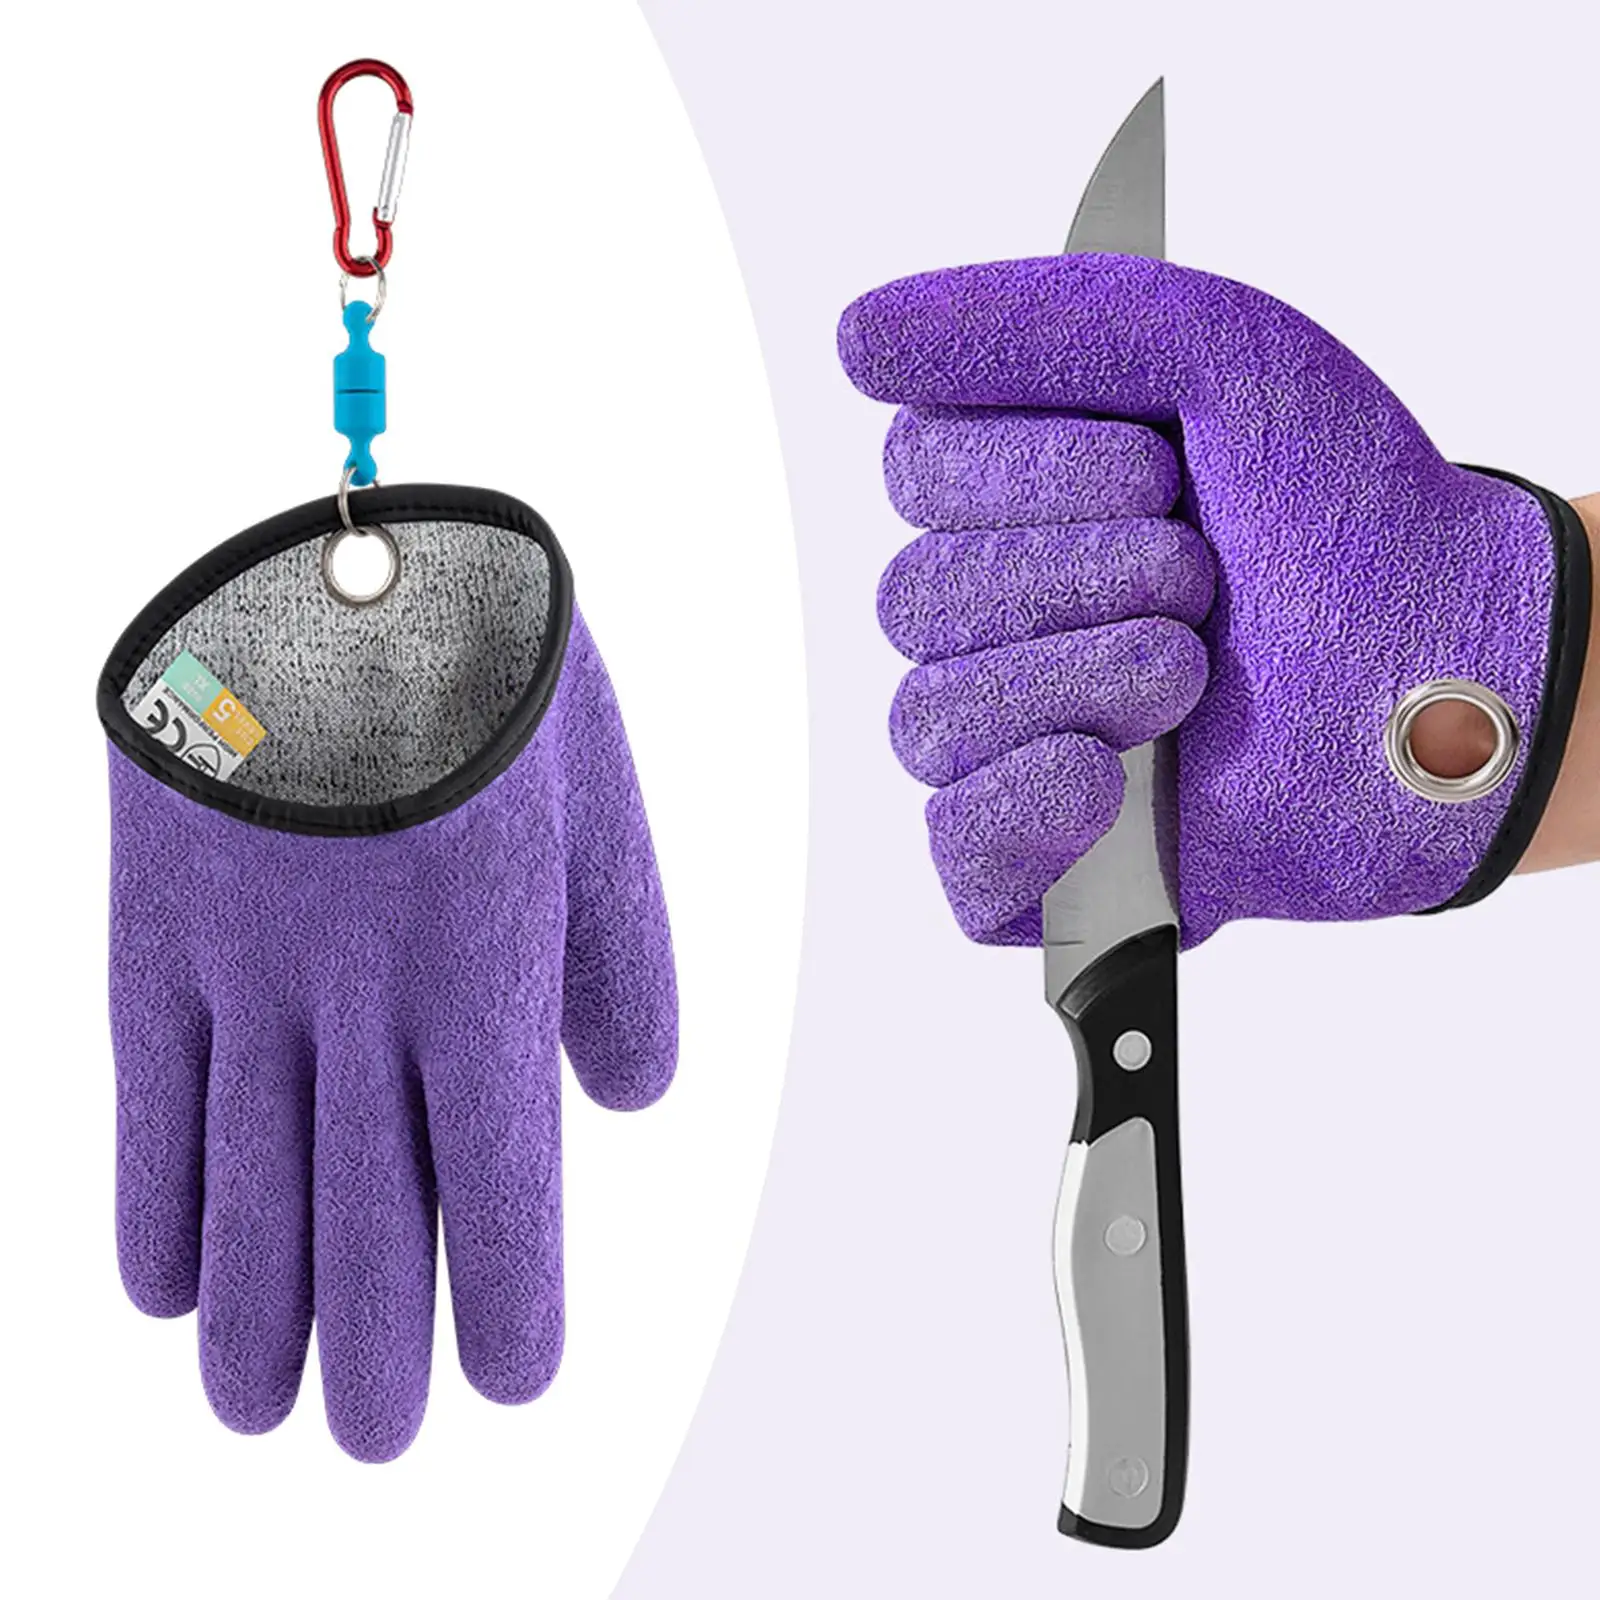 Fishing , Handy Fish for Fisherman Hand From Cuts, Puncture And Scrapes